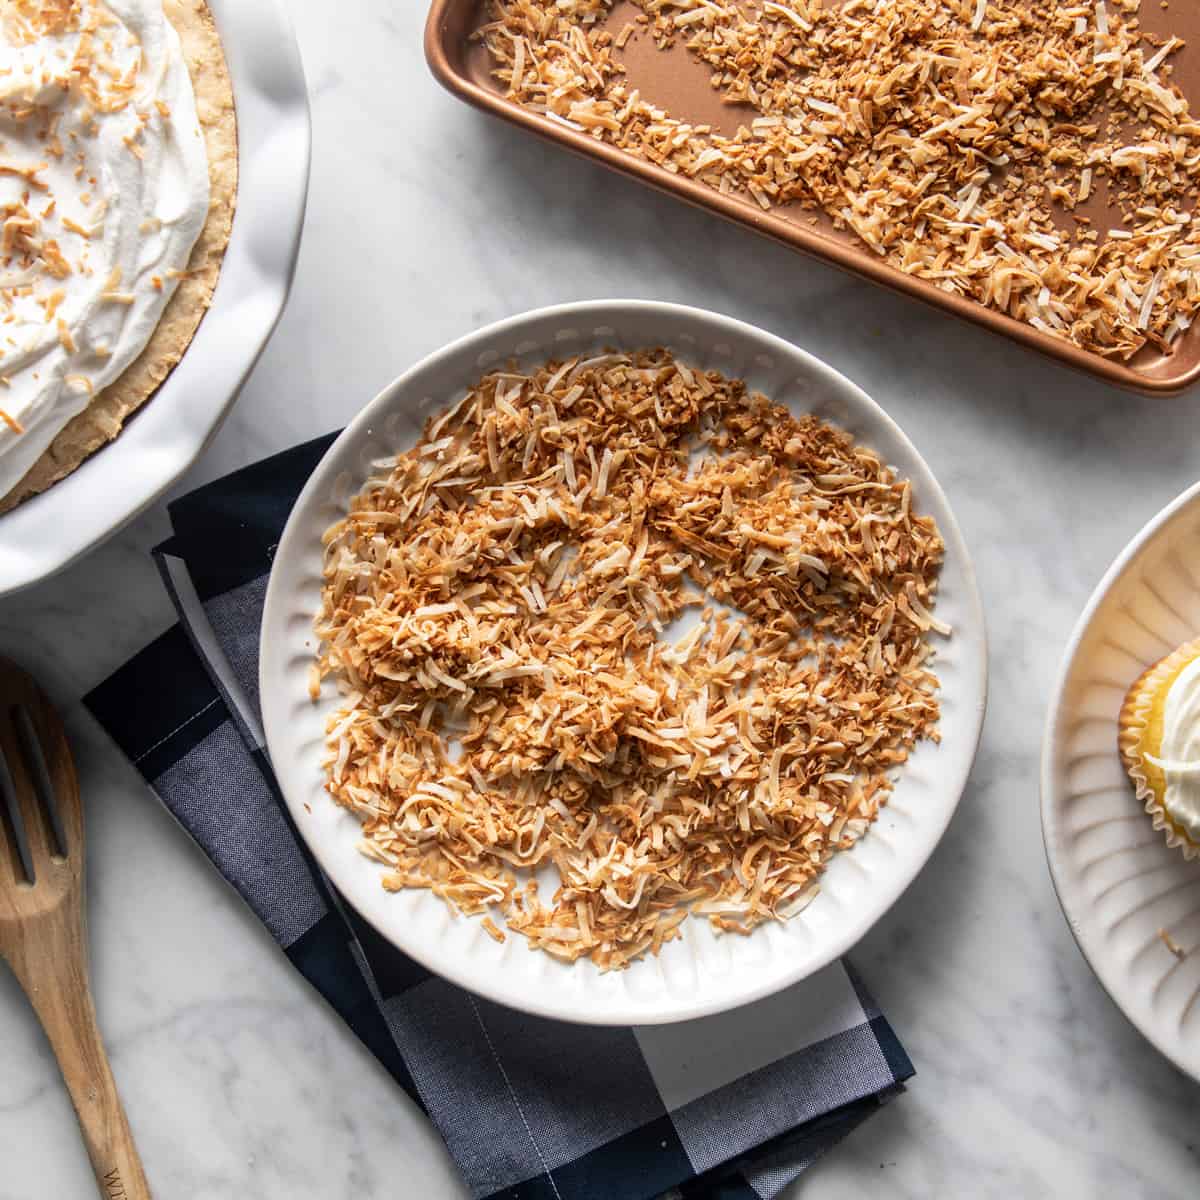 Tutorial: How to Make Toasted Coconut - The Cookie Writer